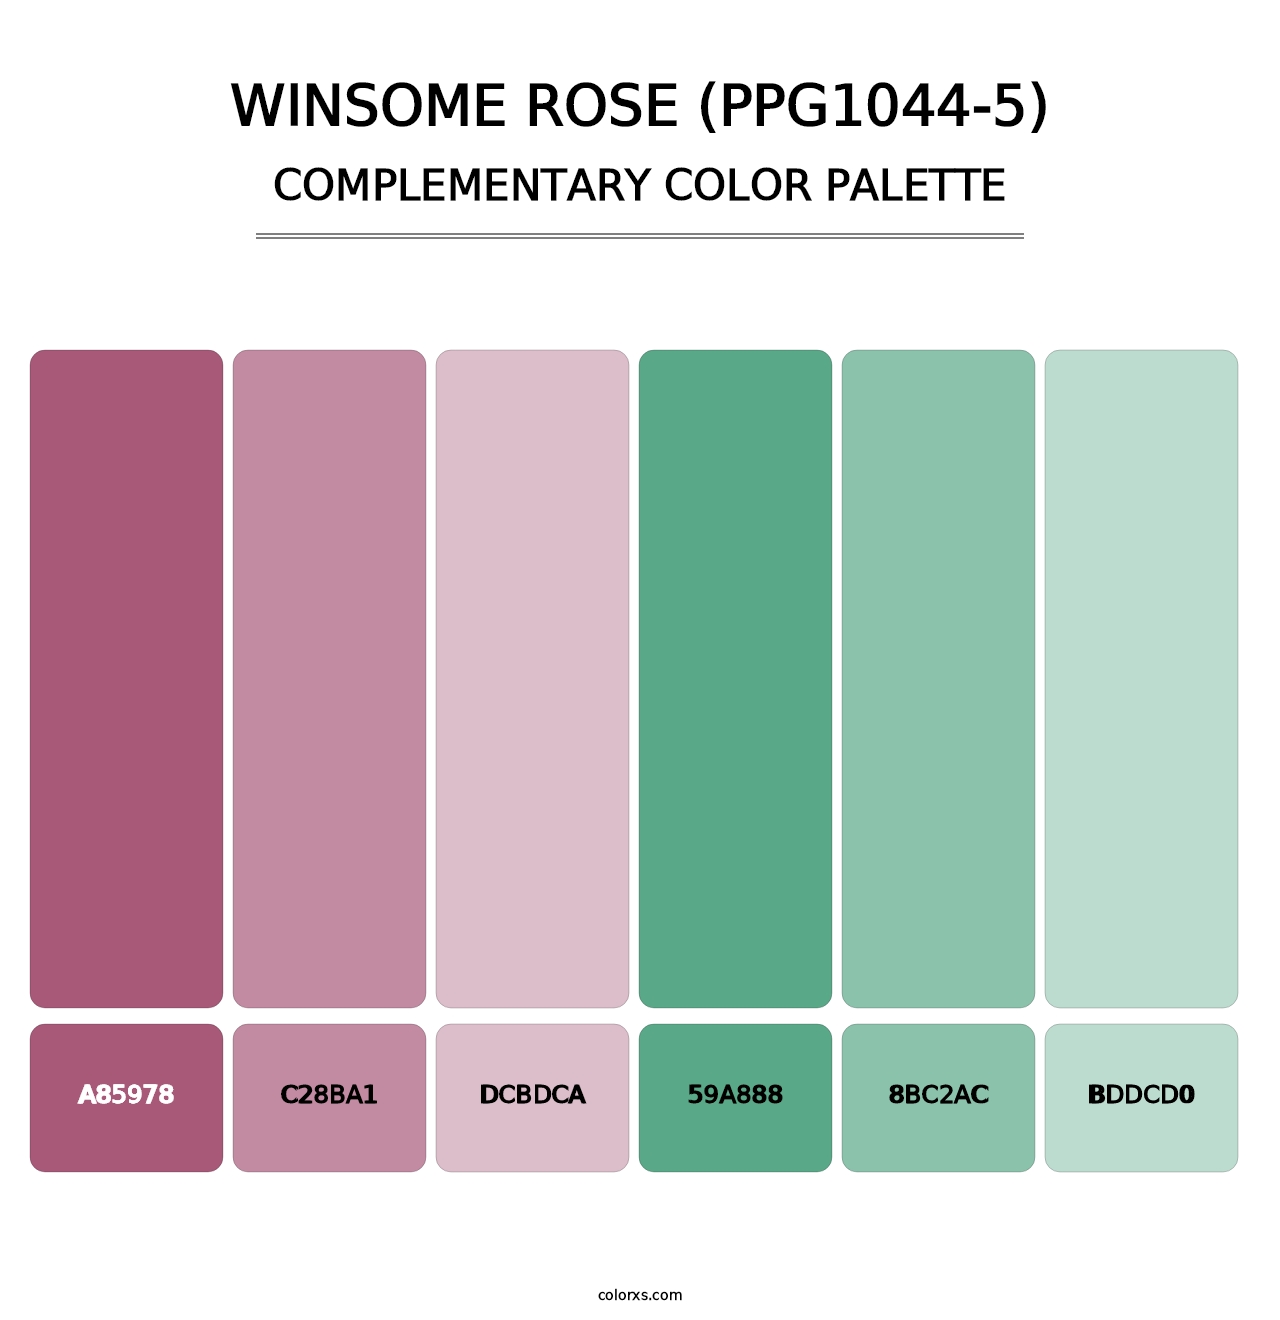 Winsome Rose (PPG1044-5) - Complementary Color Palette